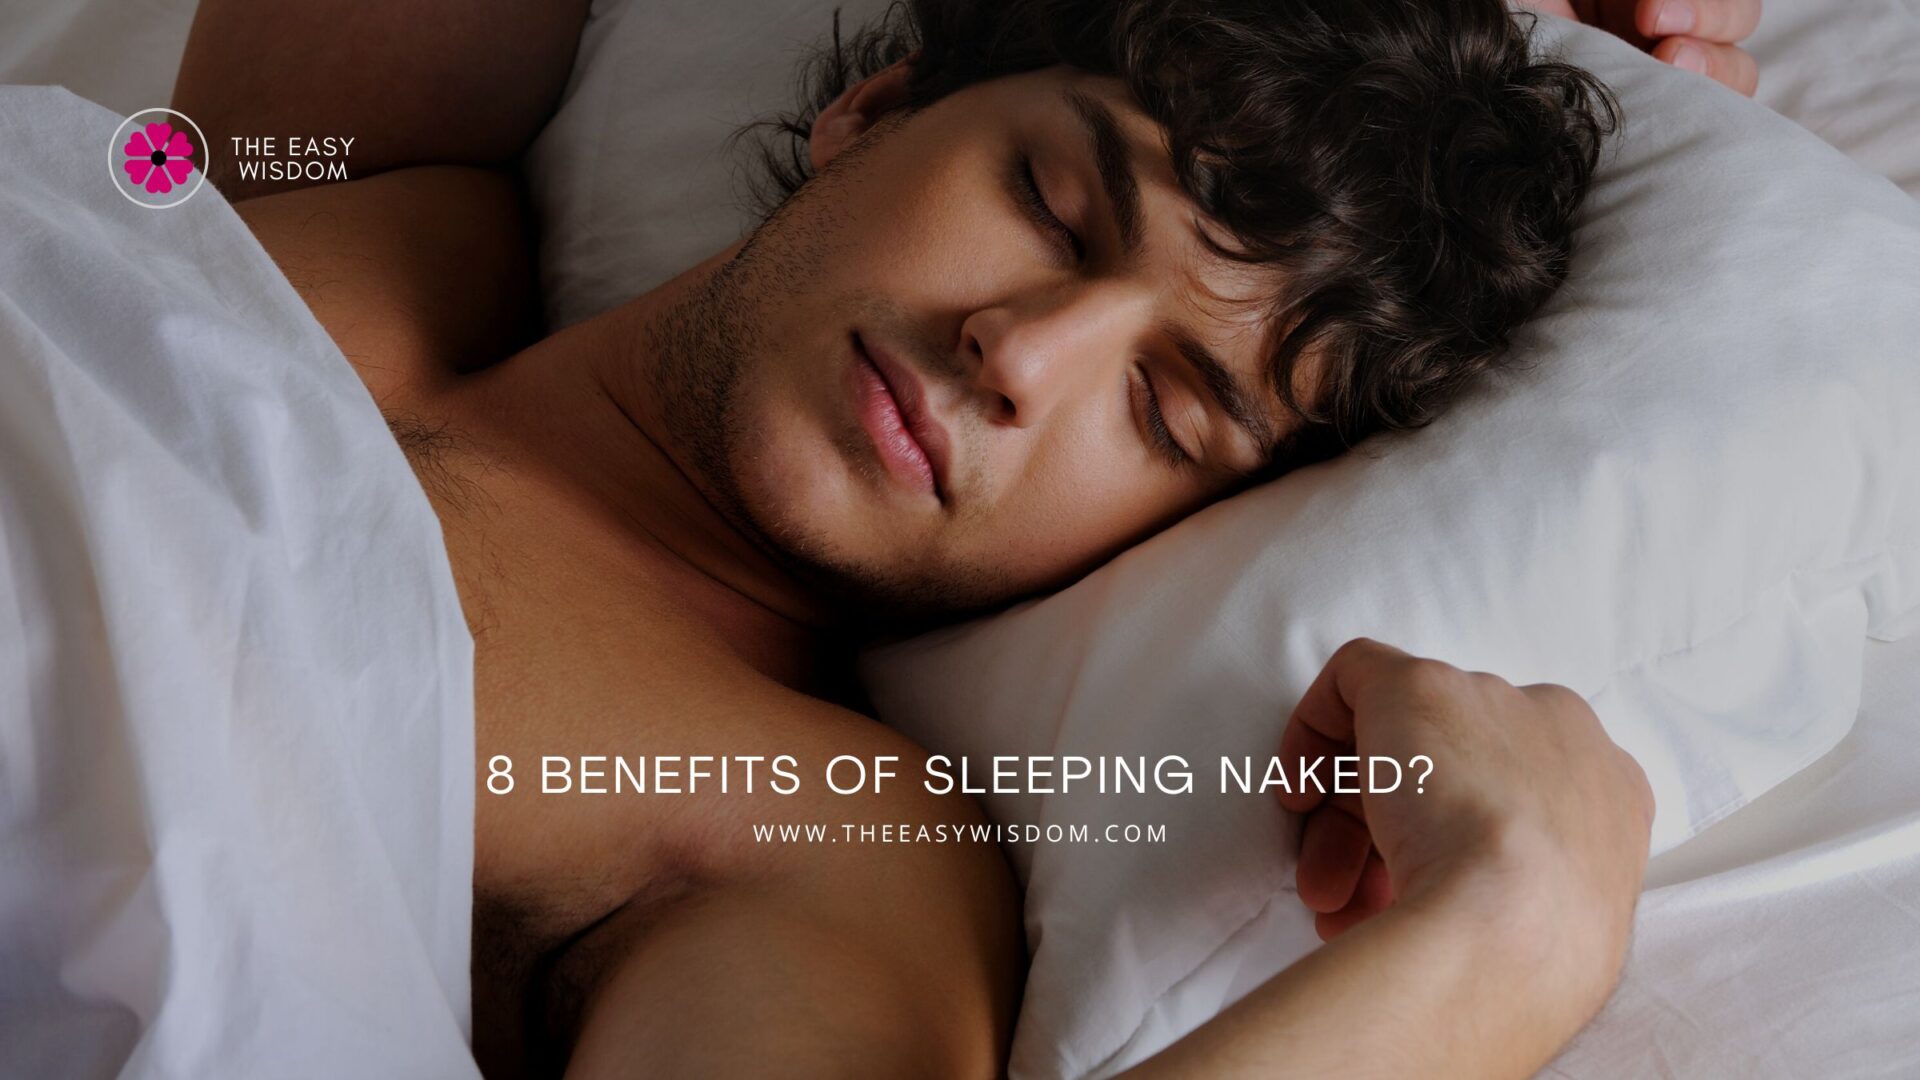 What Are the Benefits of Sleeping Naked?